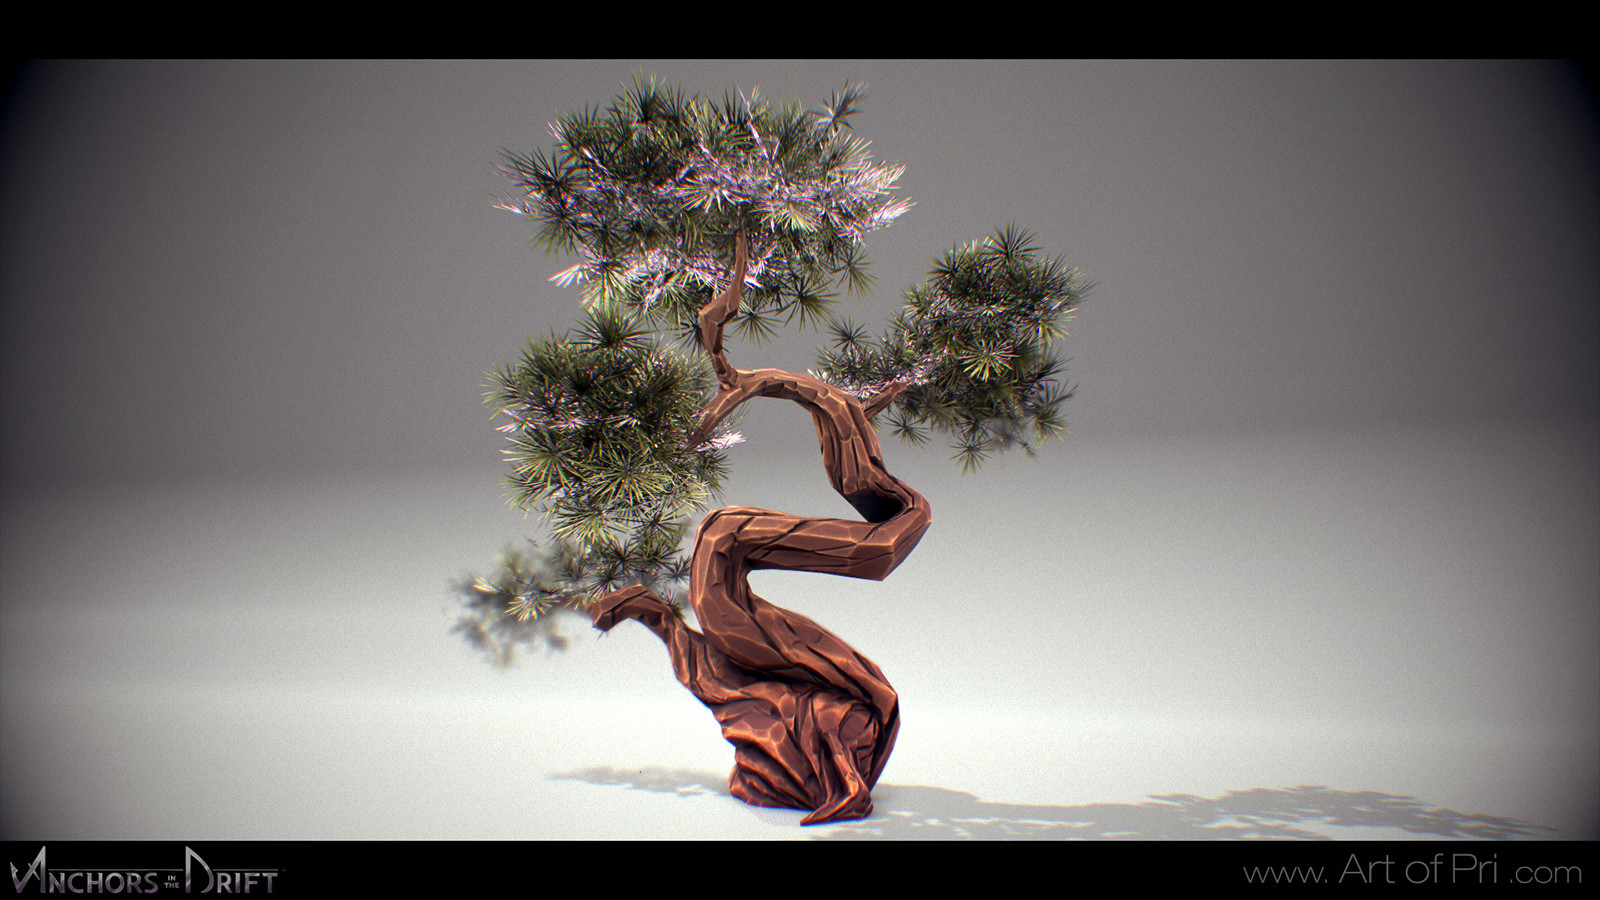 Japanese Bonsai Tree
Concept by Stacy Clark
Model by Me